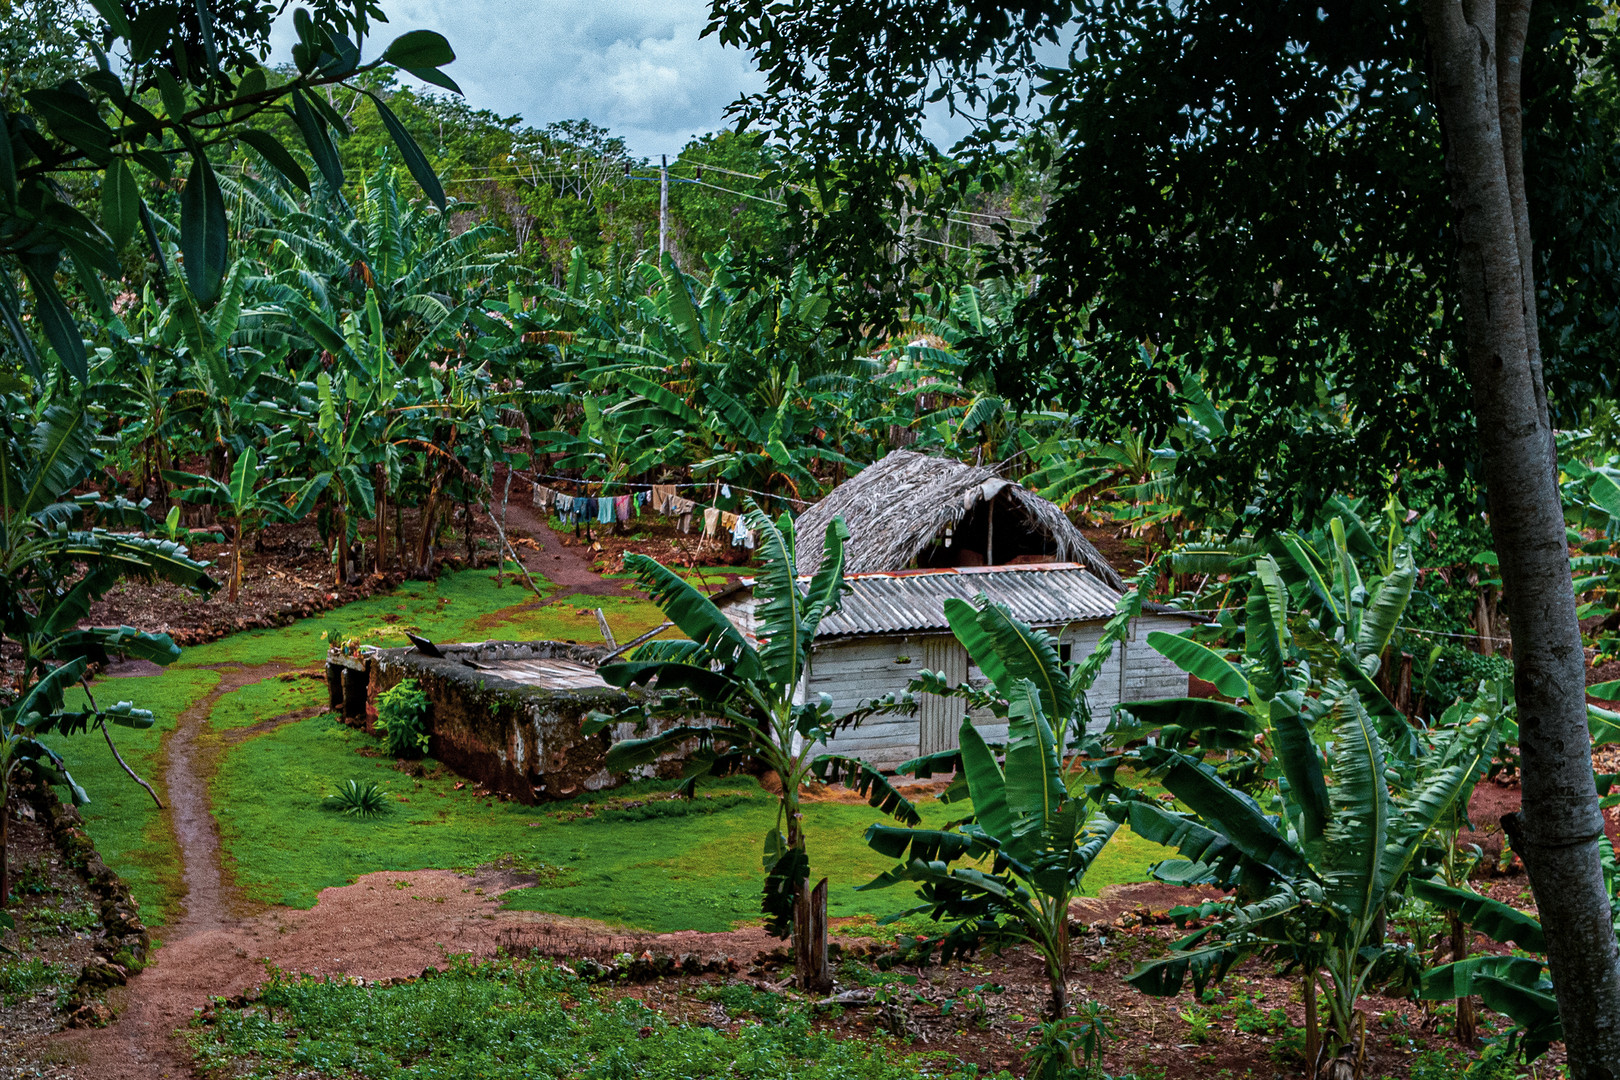 Farmers hut in Guantánamo province